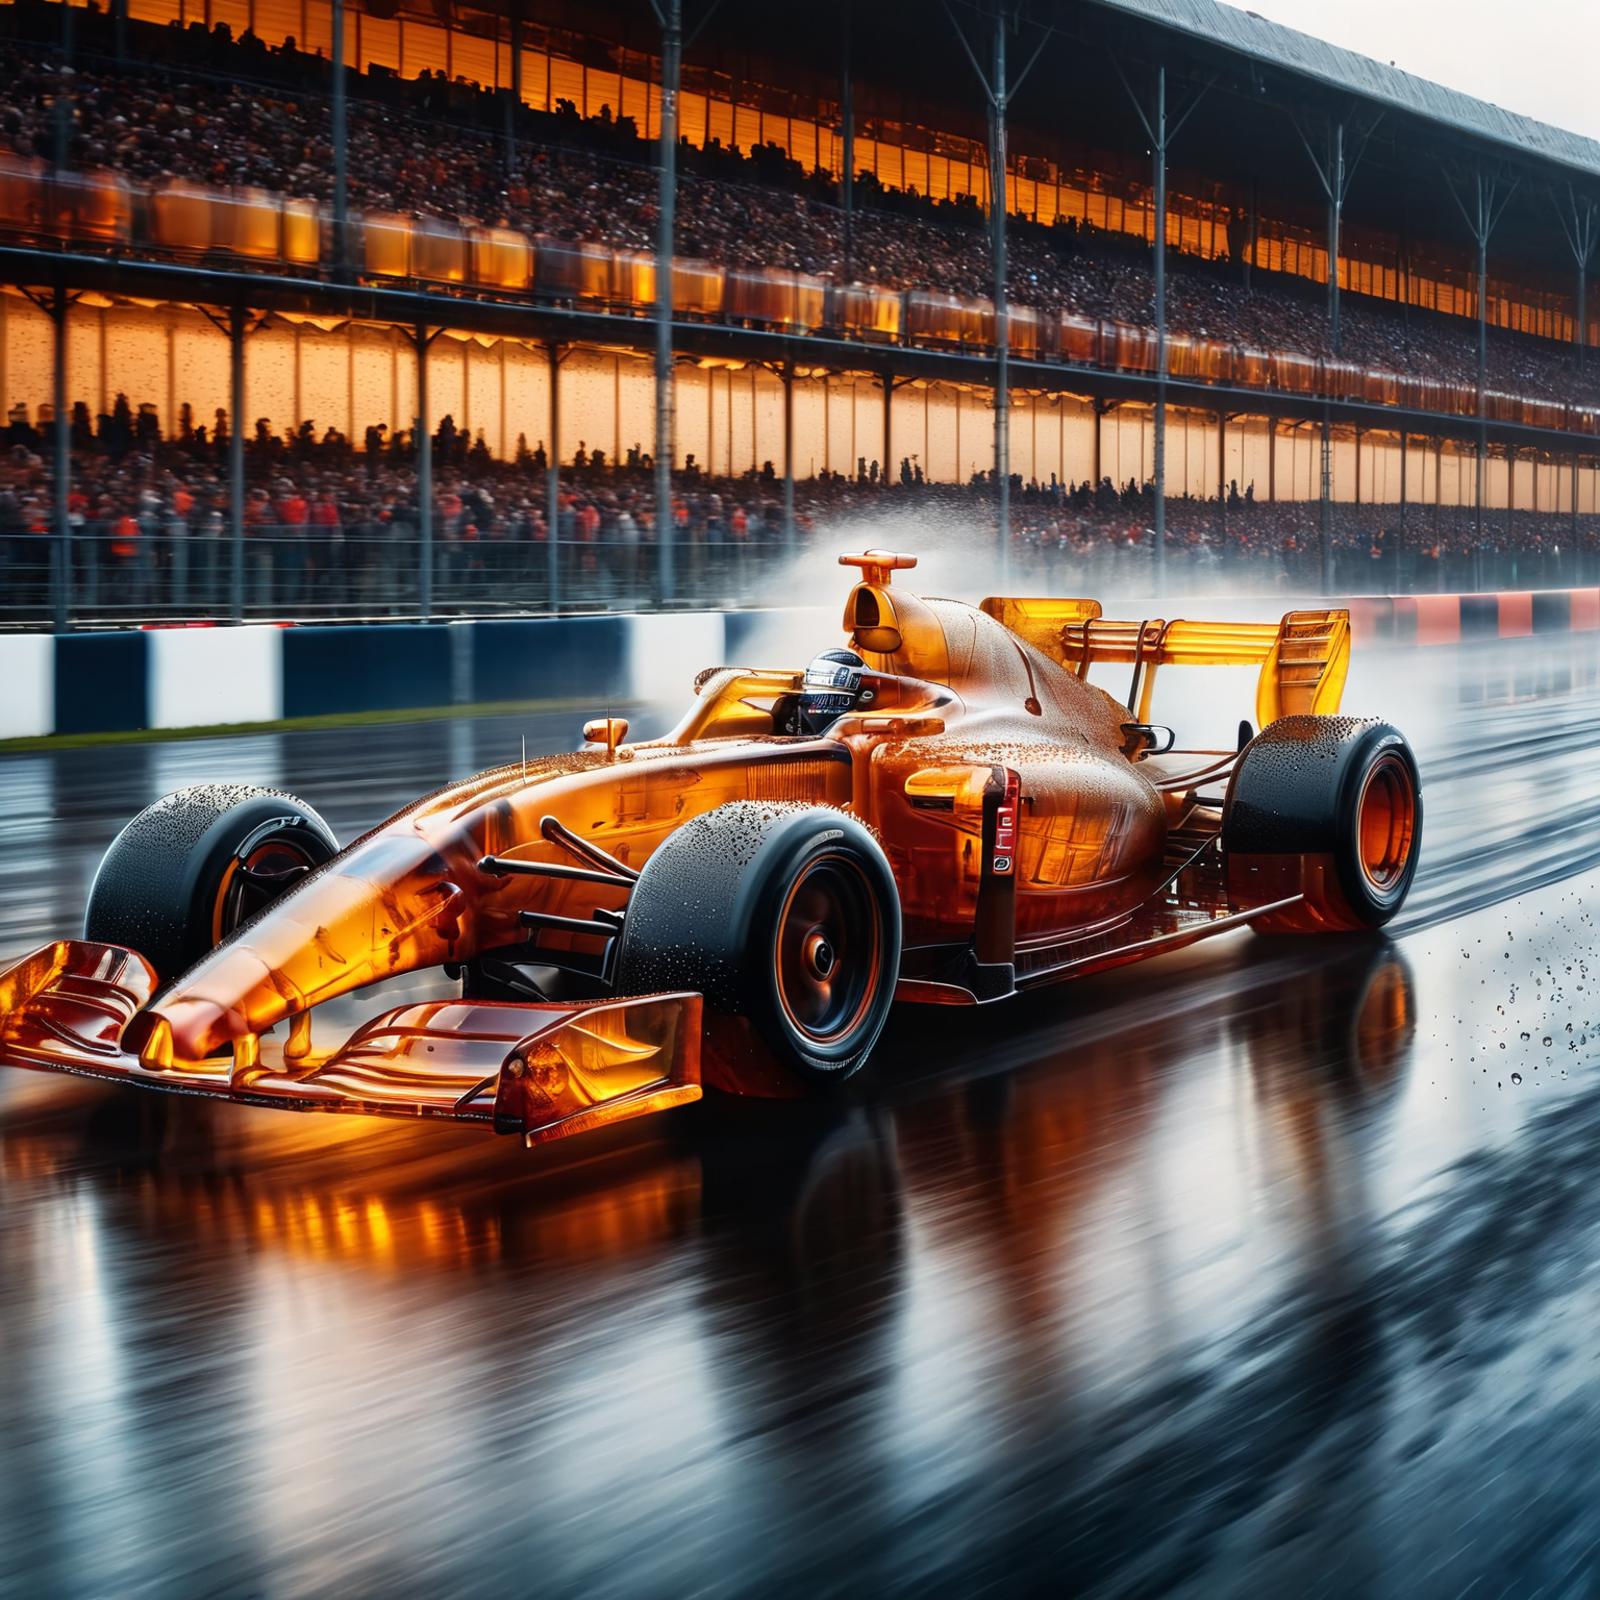 A Racing Car on a Wet Road in the Rain